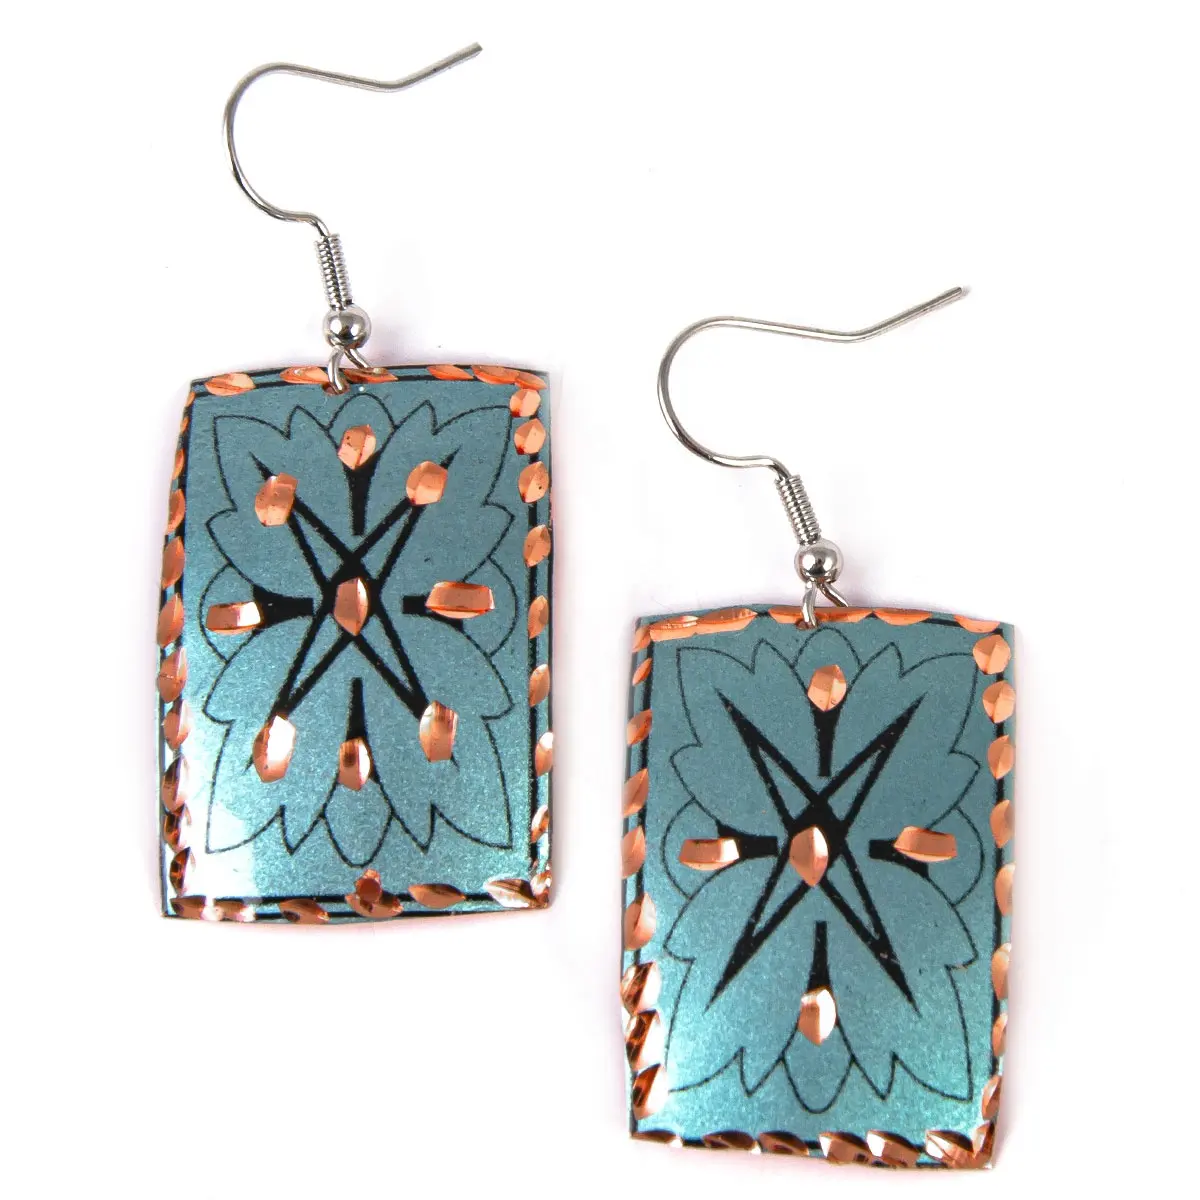 Hand Made Turkish Designed Copper Earring Charm from Turkey